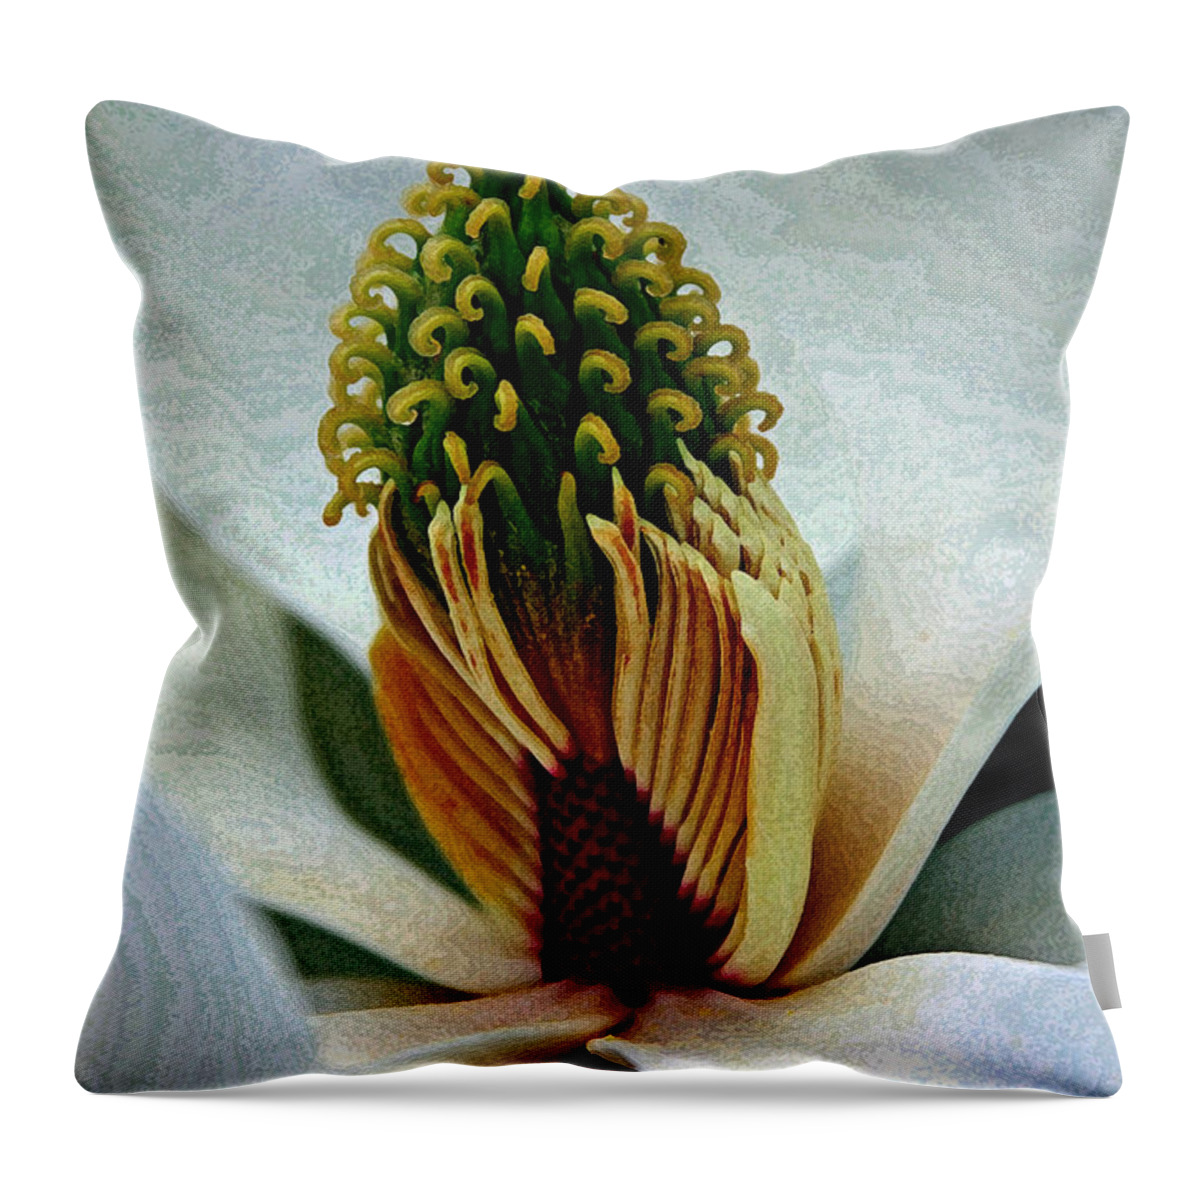 White Throw Pillow featuring the digital art Into the heart of the magnolia drybrush by Andy Lawless